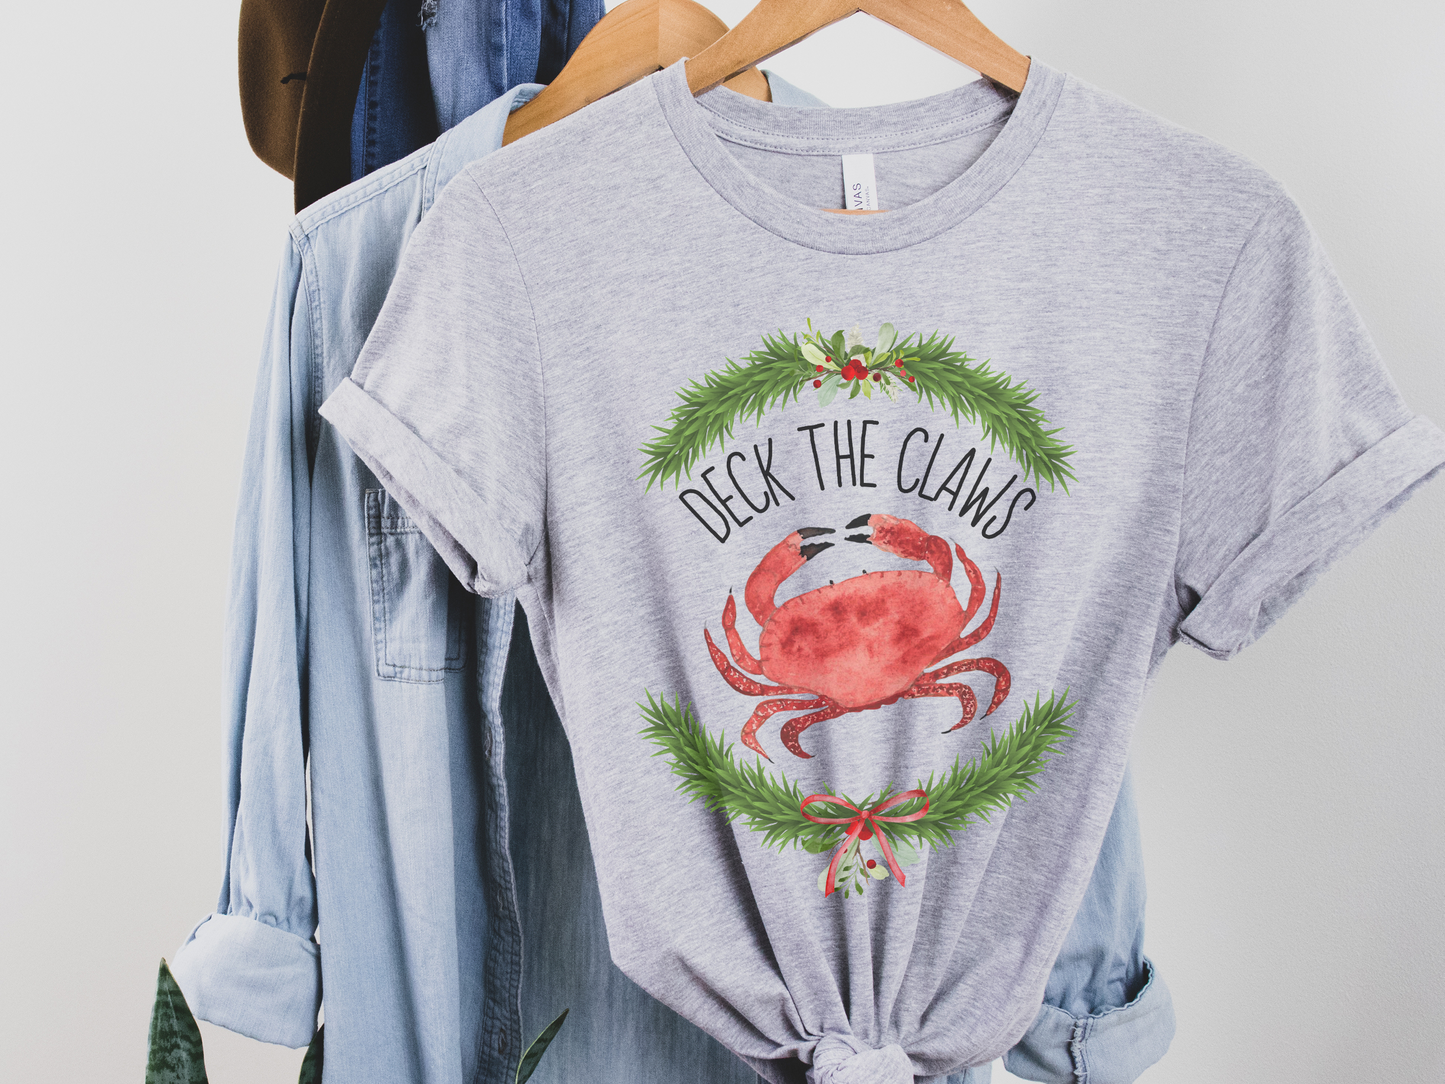 Deck The Claws Holiday Crab Shirt